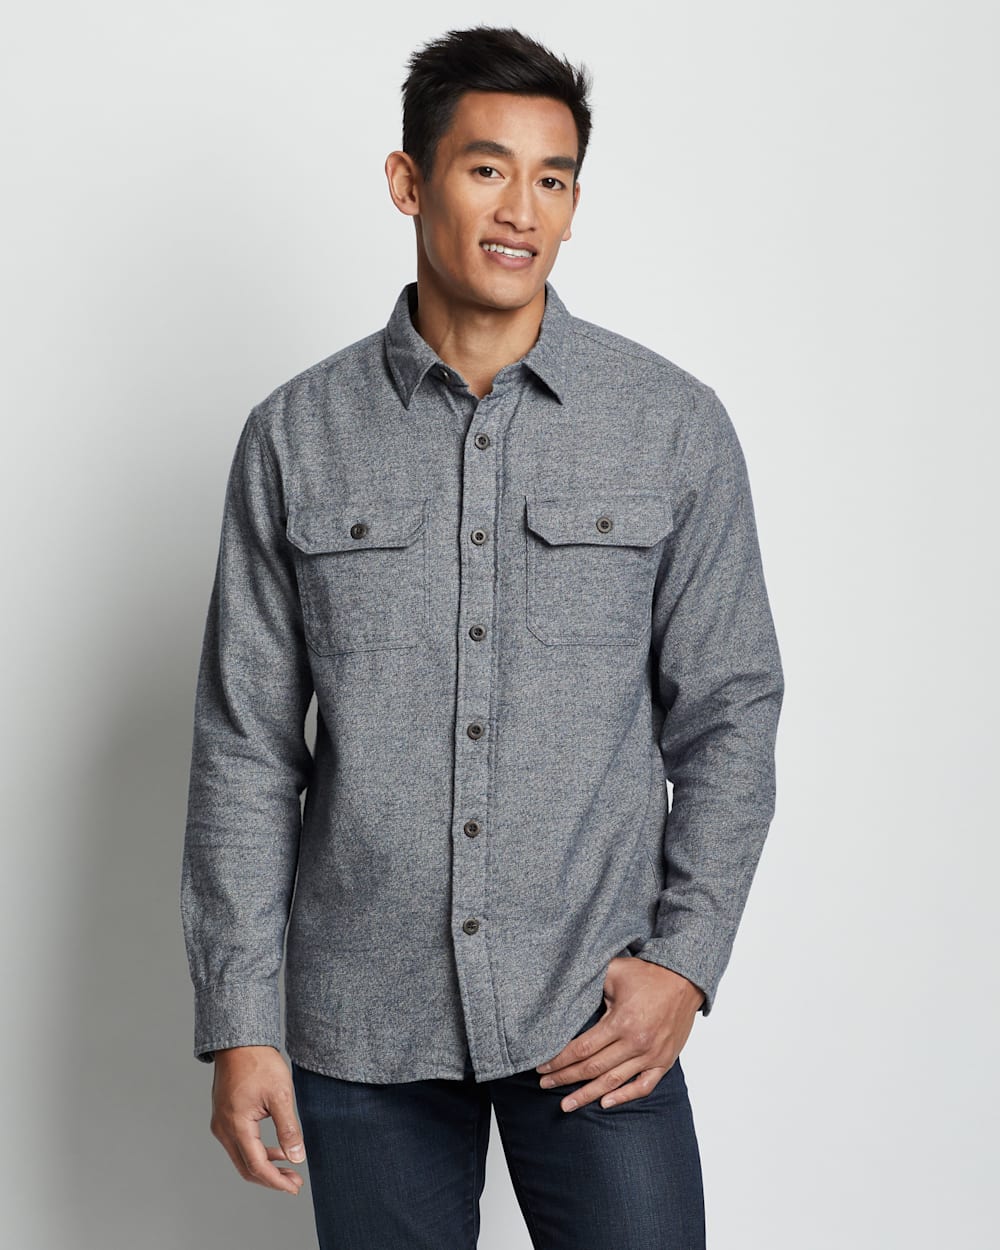 MEN'S BURNSIDE DOUBLE-BRUSHED FLANNEL SHIRT IN CLASSIC NAVY HEATHER image number 1